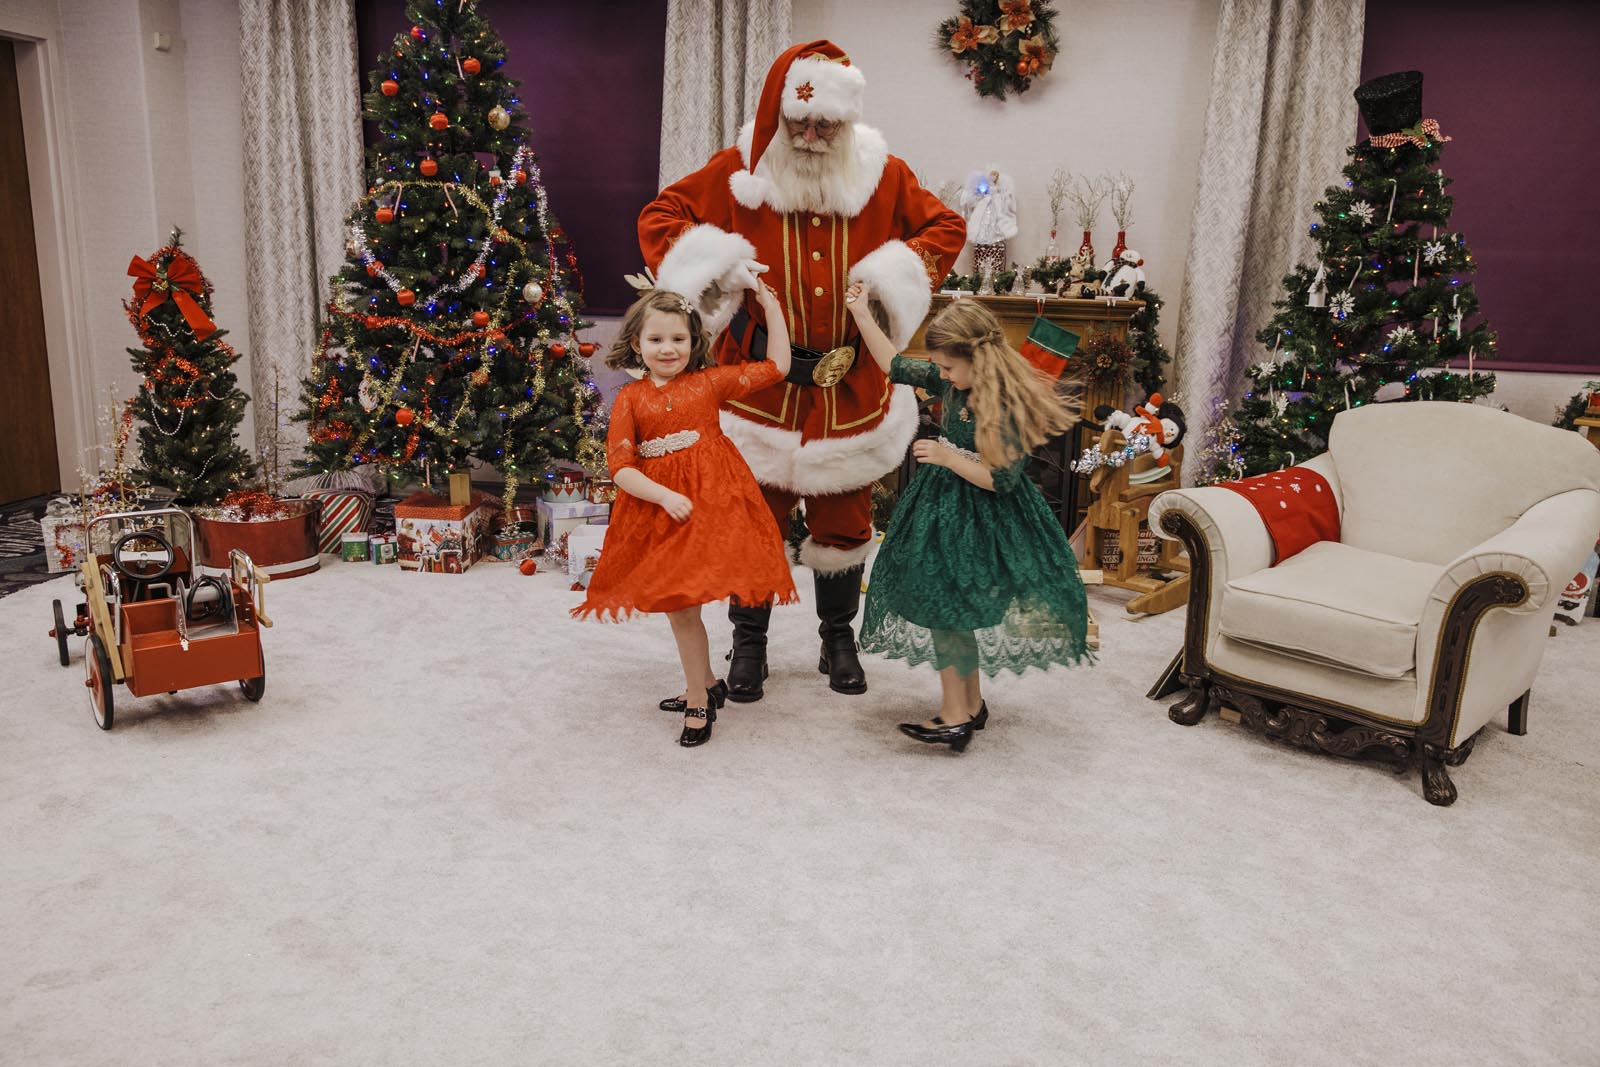 boise santa pics santa dancing with two little girls in fancy dresses twirling around